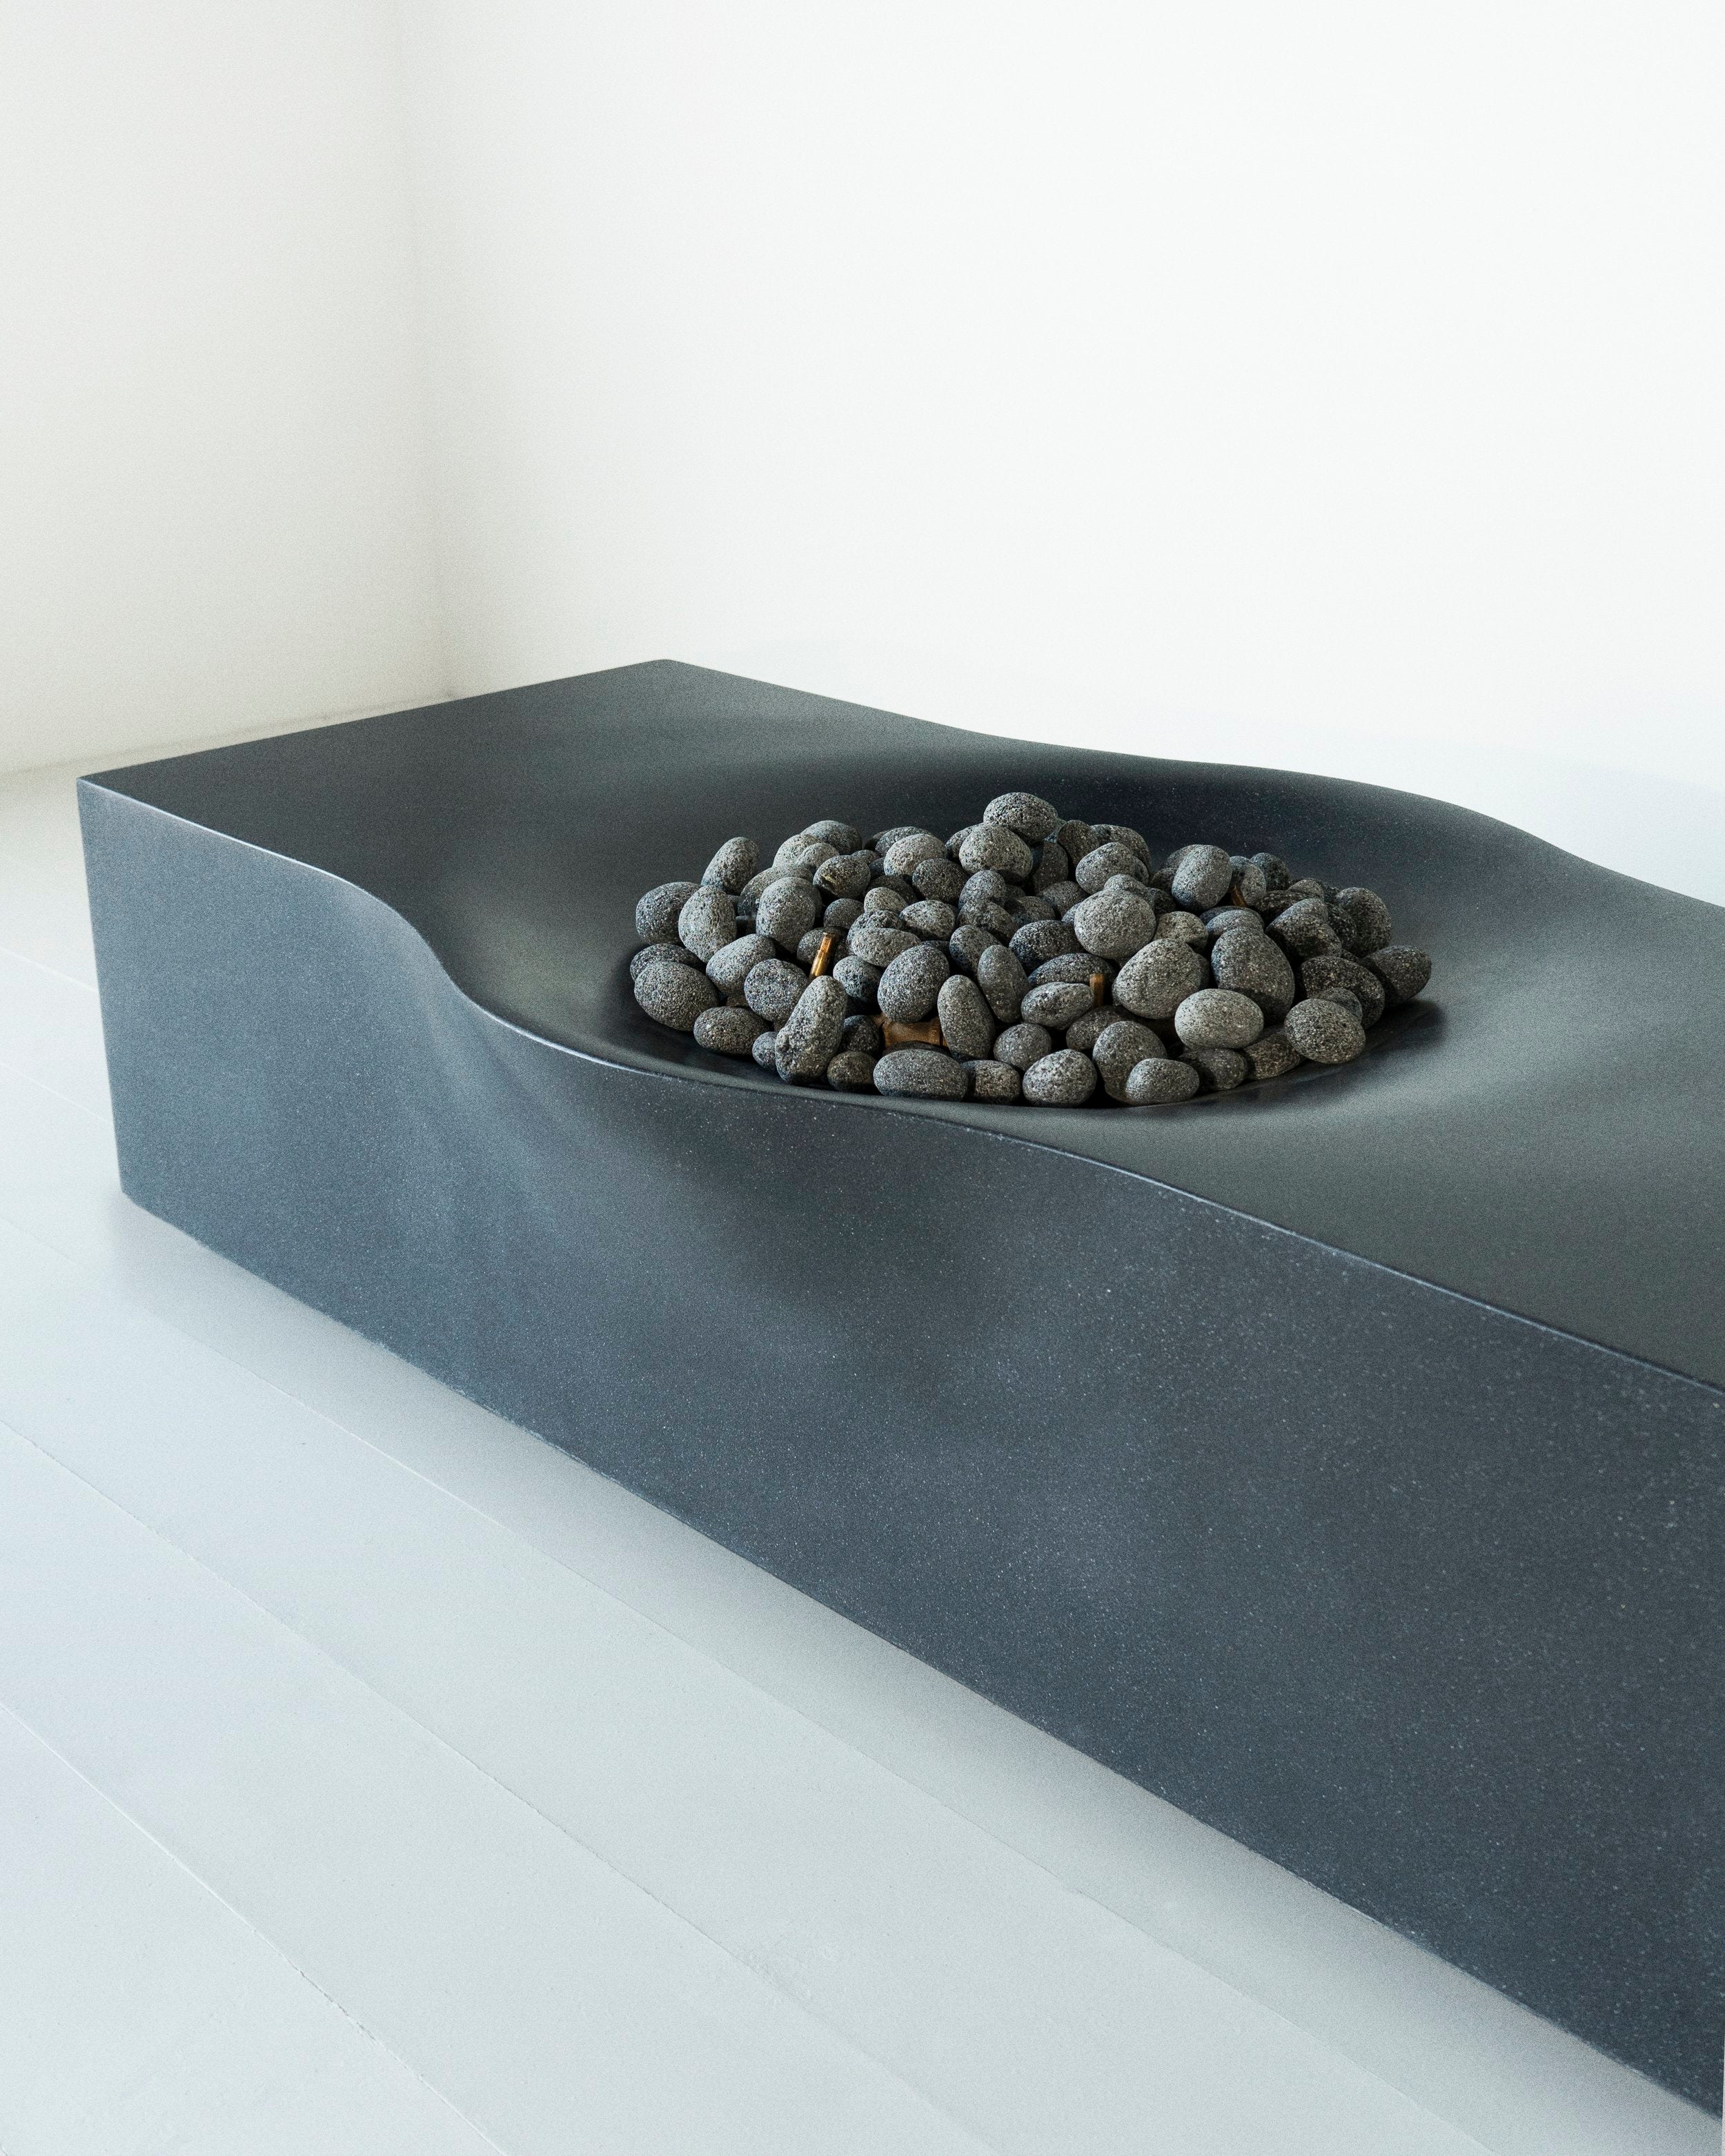 Nido concrete fire pit with small fire pit rocks on top